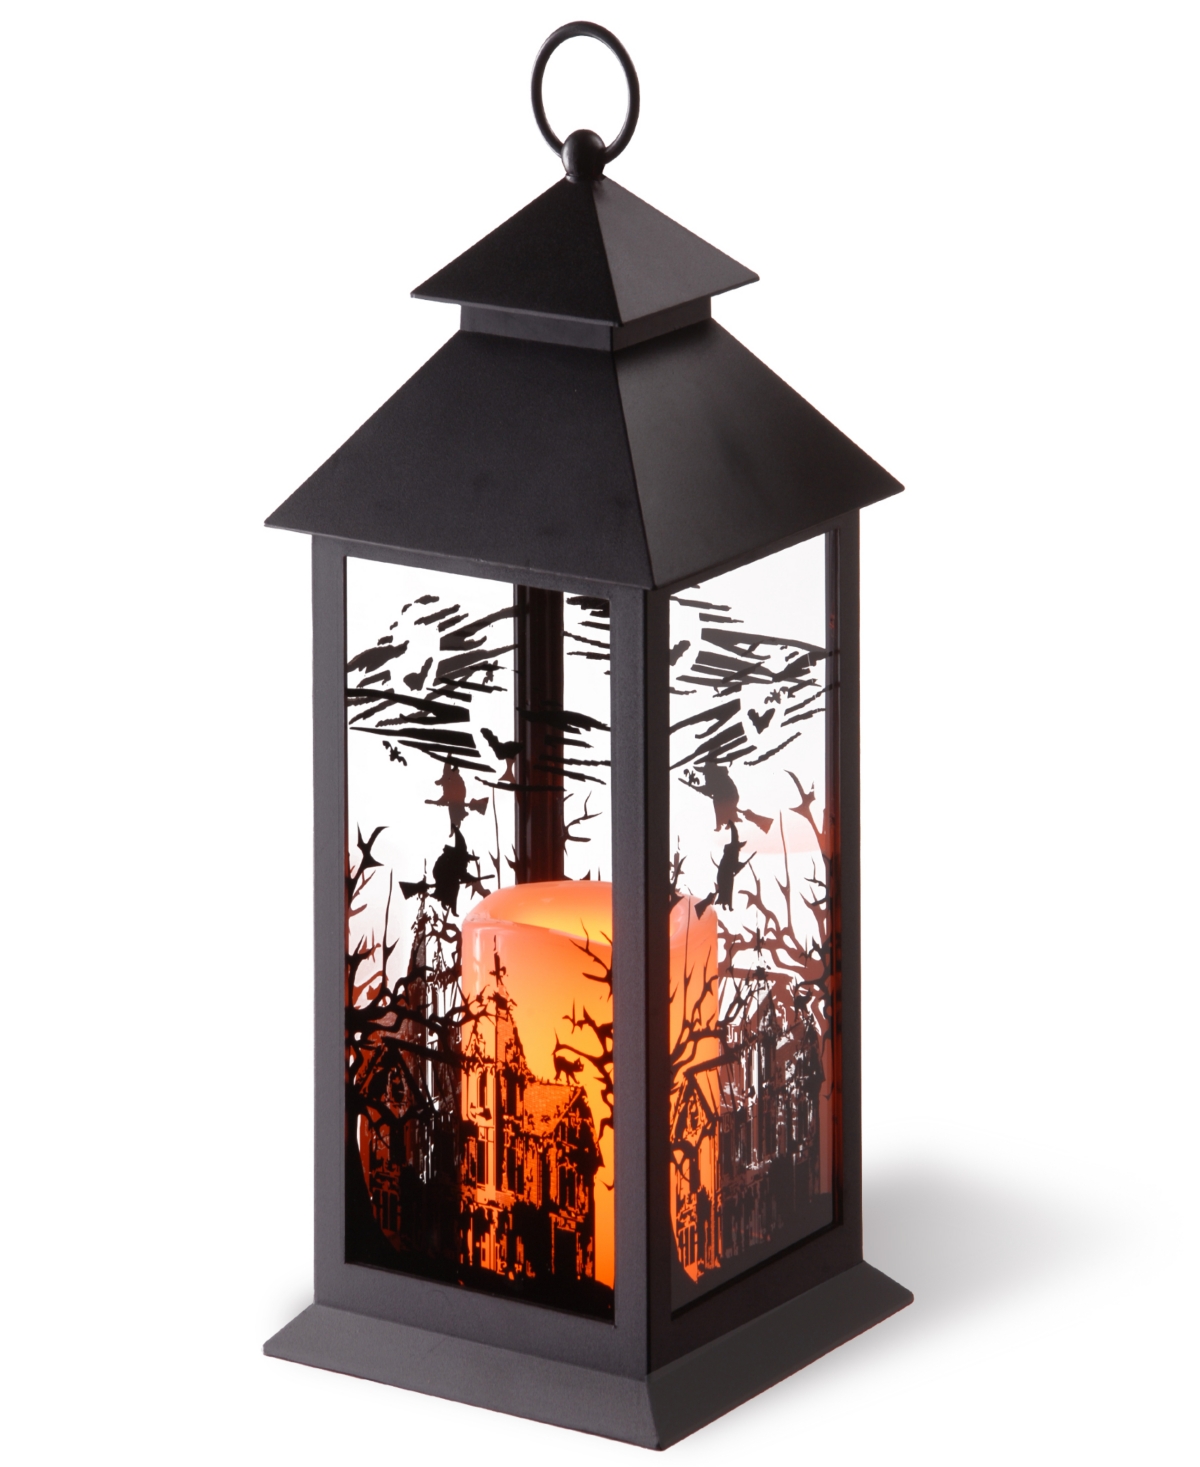 12" Halloween Lantern with Led Lights, Carved Images of Witches, Haunted House - Black